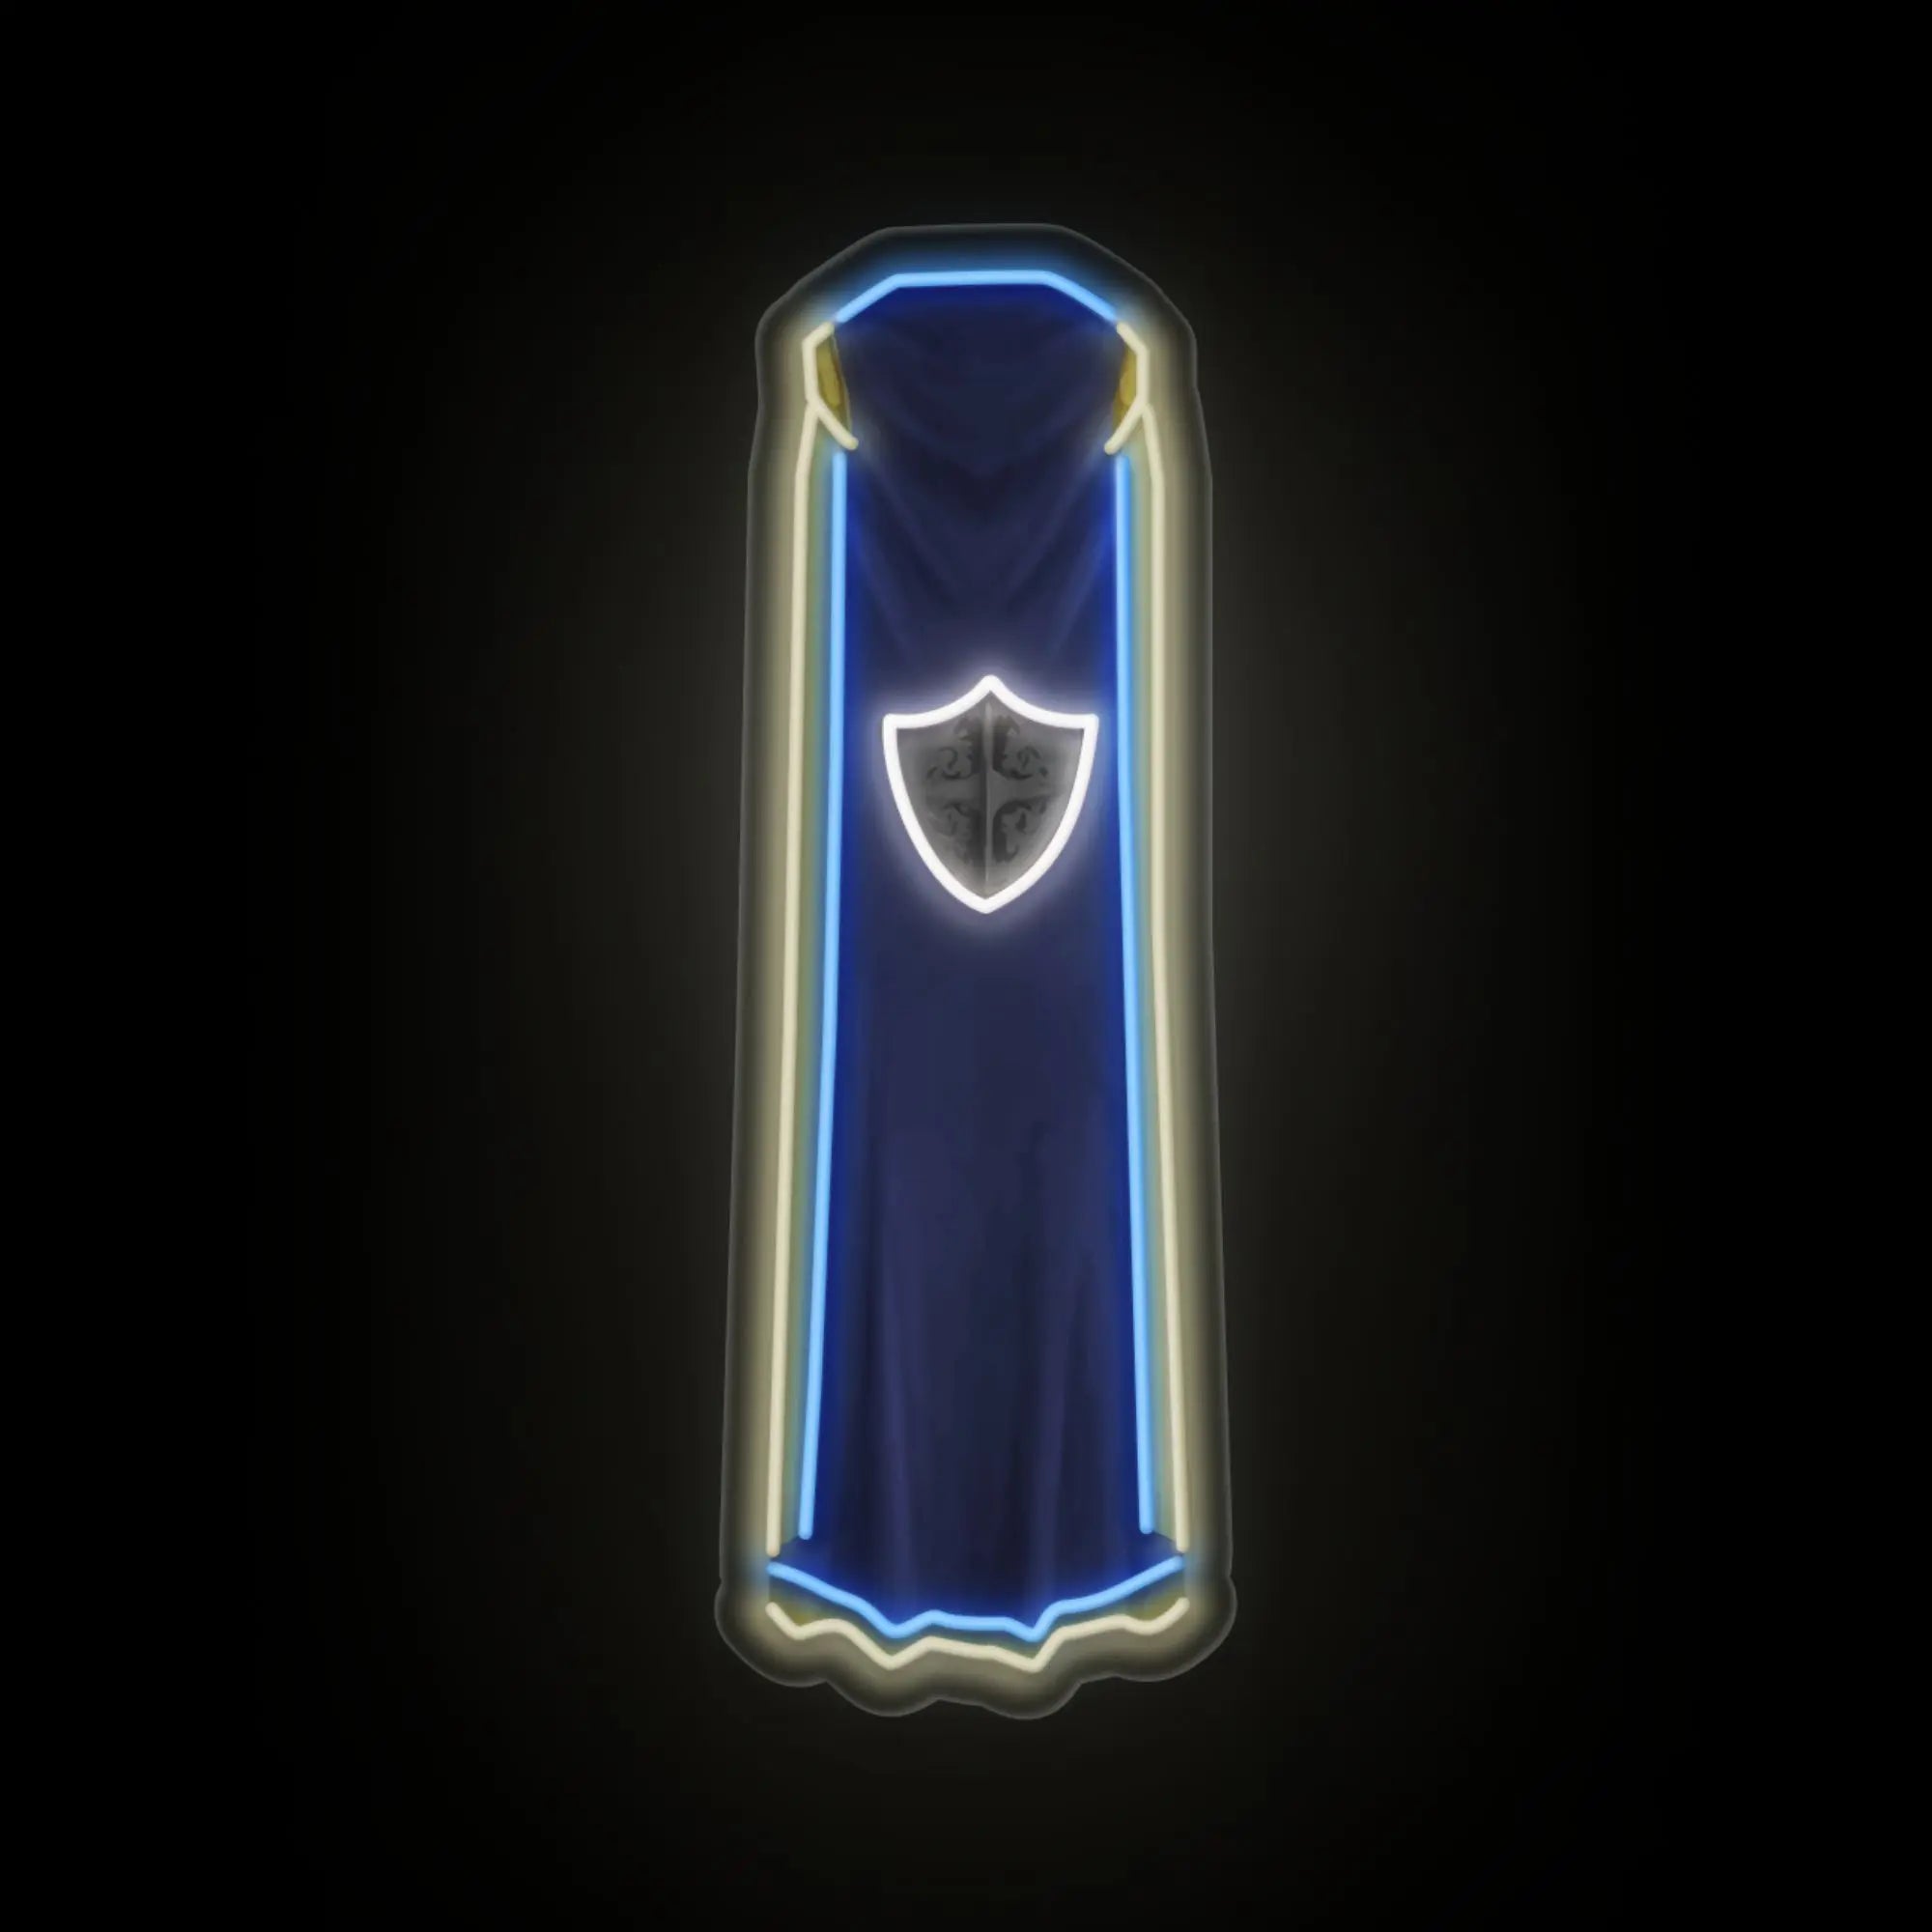 The RS3 Defence Cape LED neon sign (type 